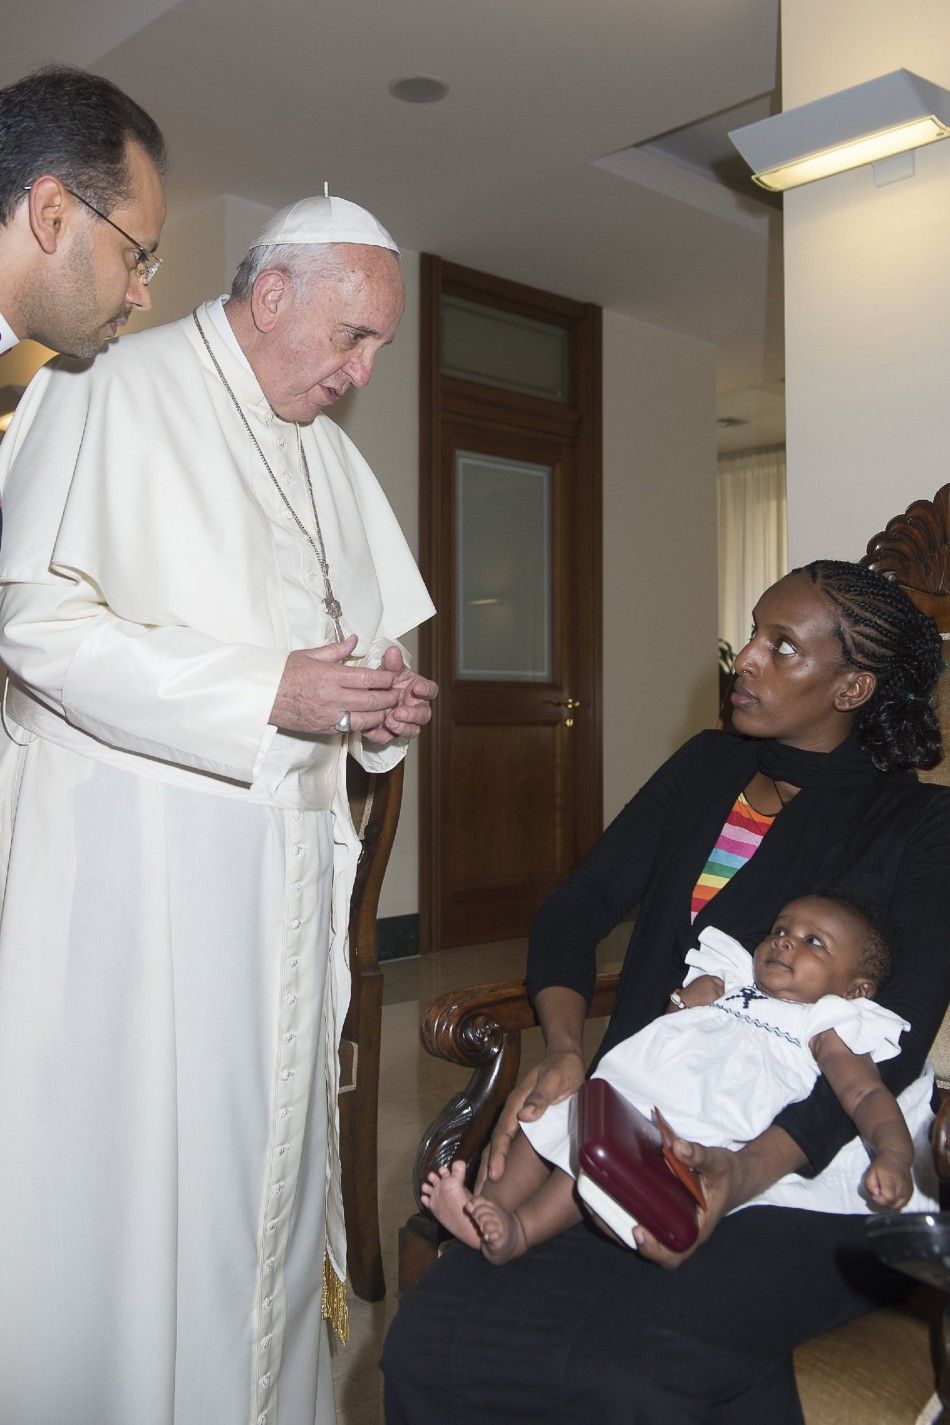 Pope Francis talks with Mariam Yahya Ibrahim of Sudan during a private meeting at the Vatican July 24, 2014. The Sudanese woman who was sentenced to death for converting from Islam to Christianity, then detained after her conviction was quashed, flew into